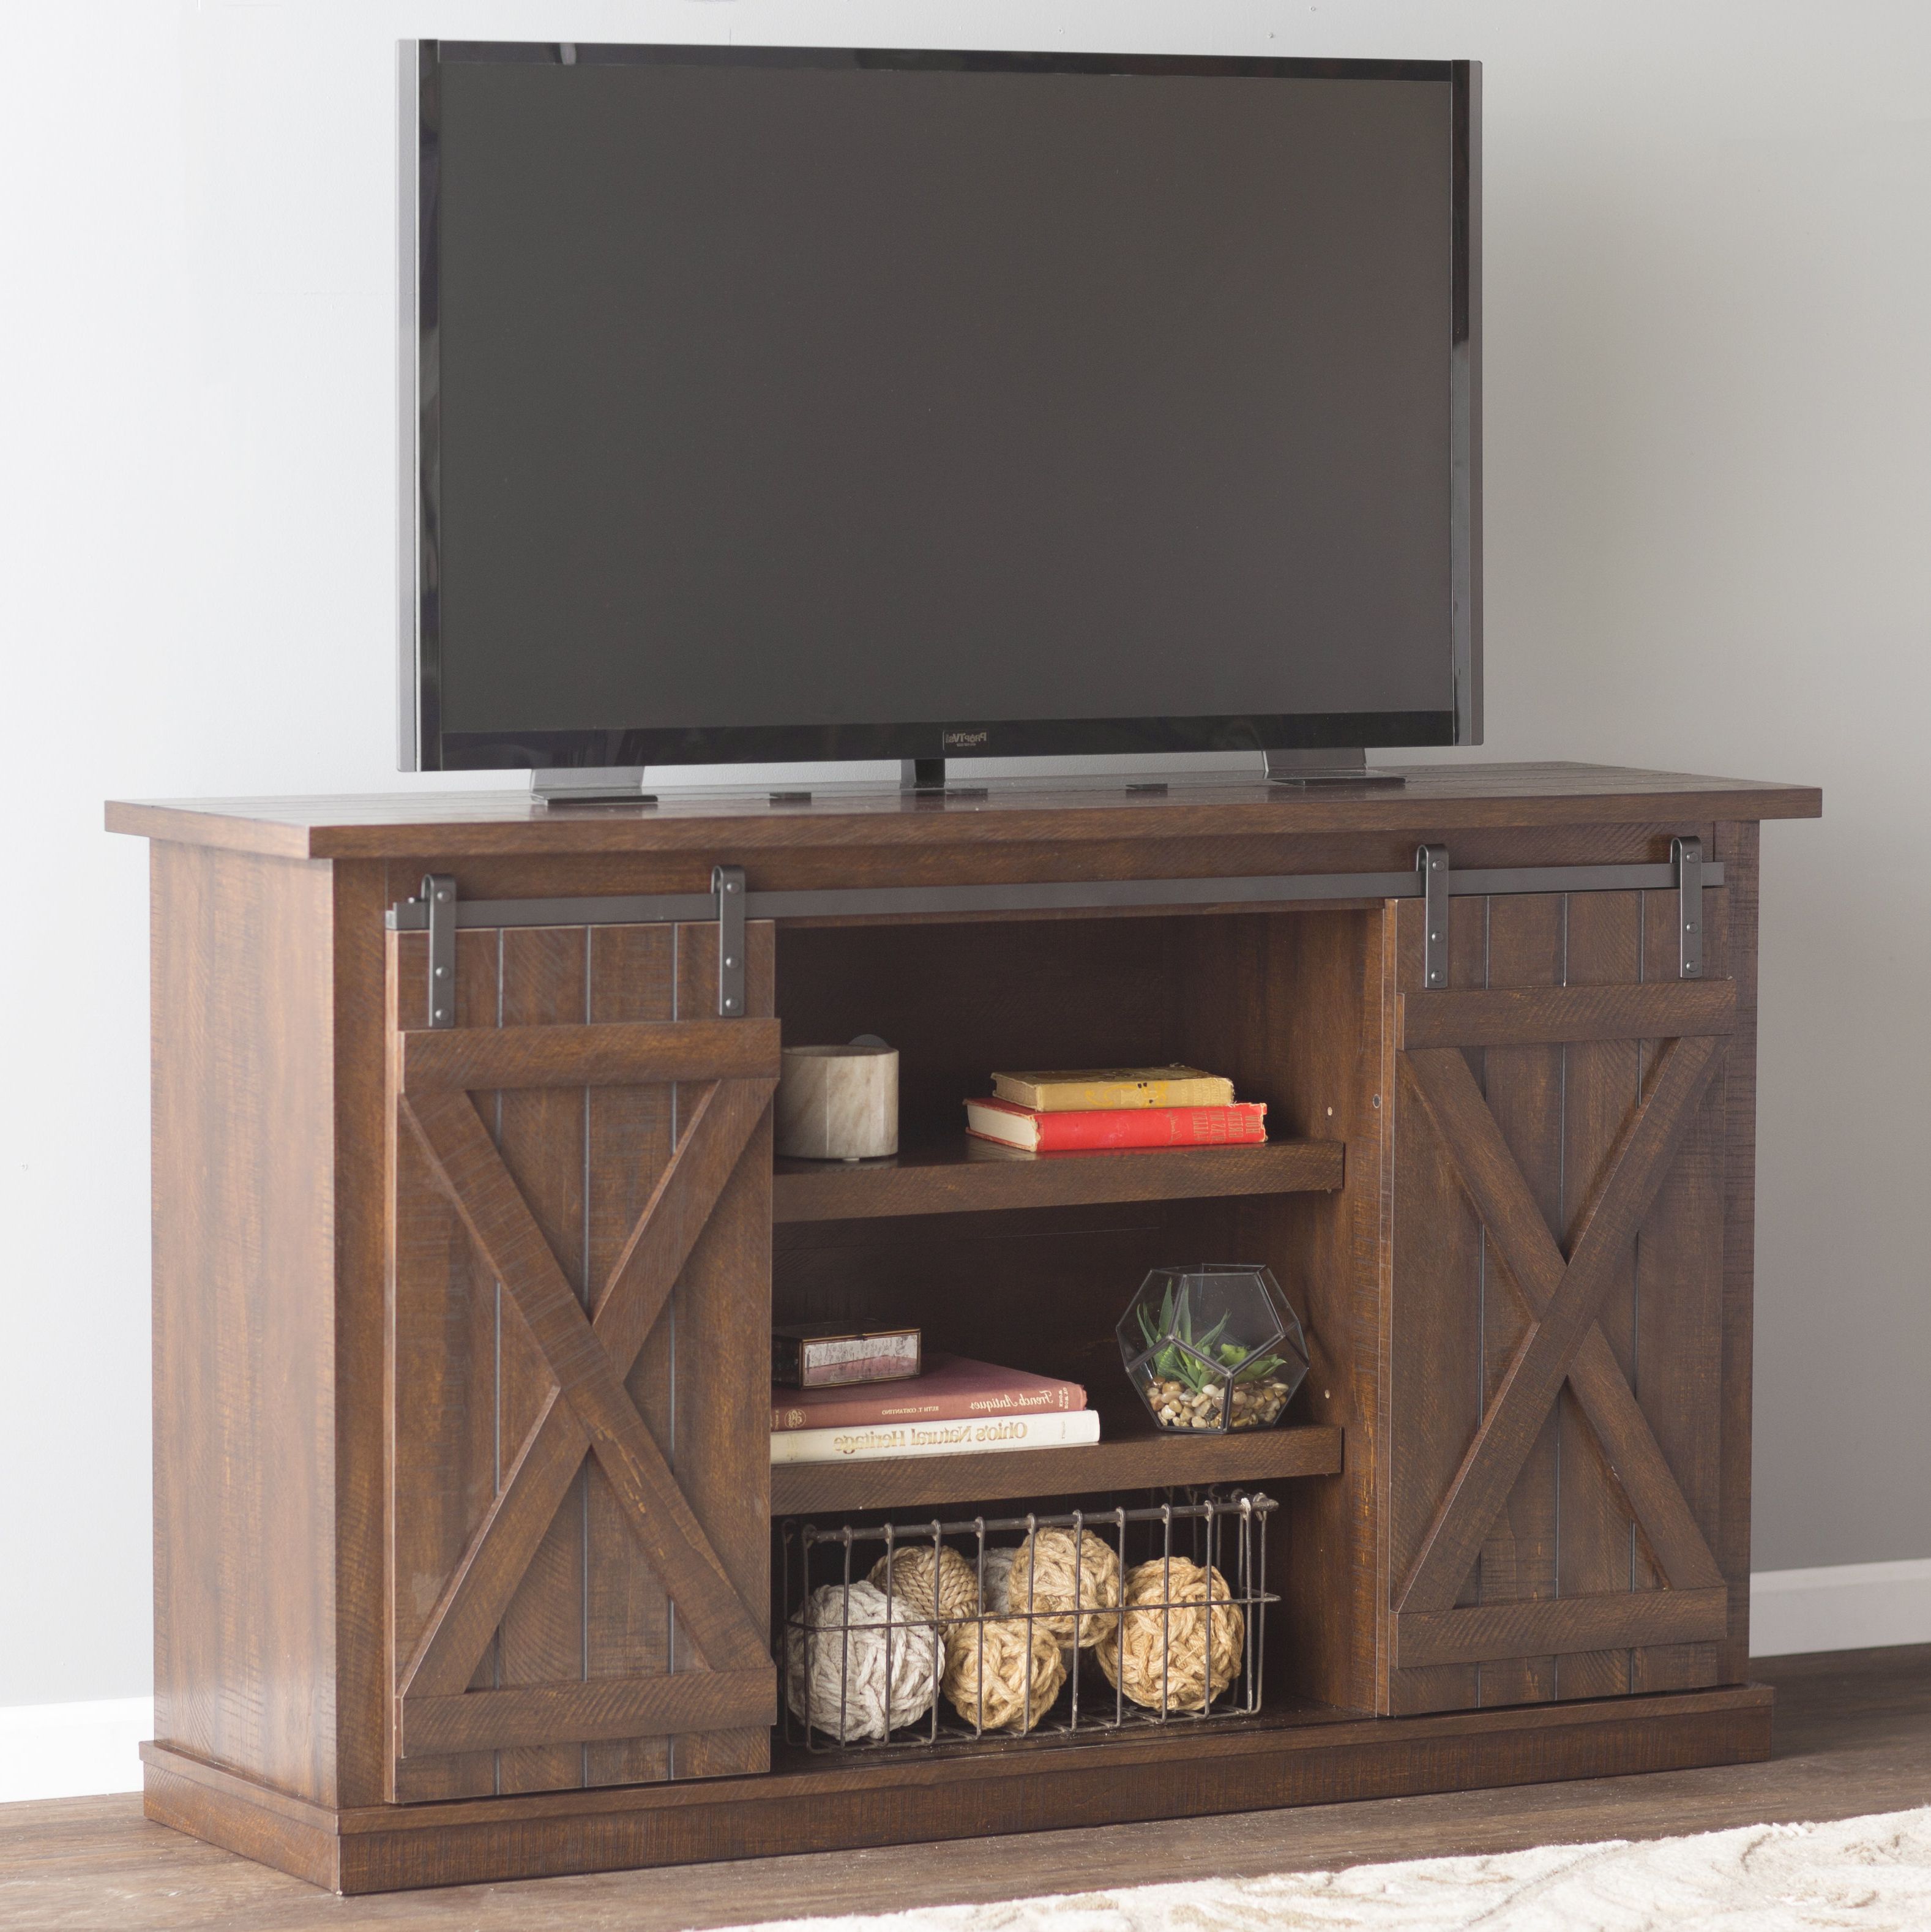 Wayfair Throughout Corner 60 Inch Tv Stands (View 7 of 20)